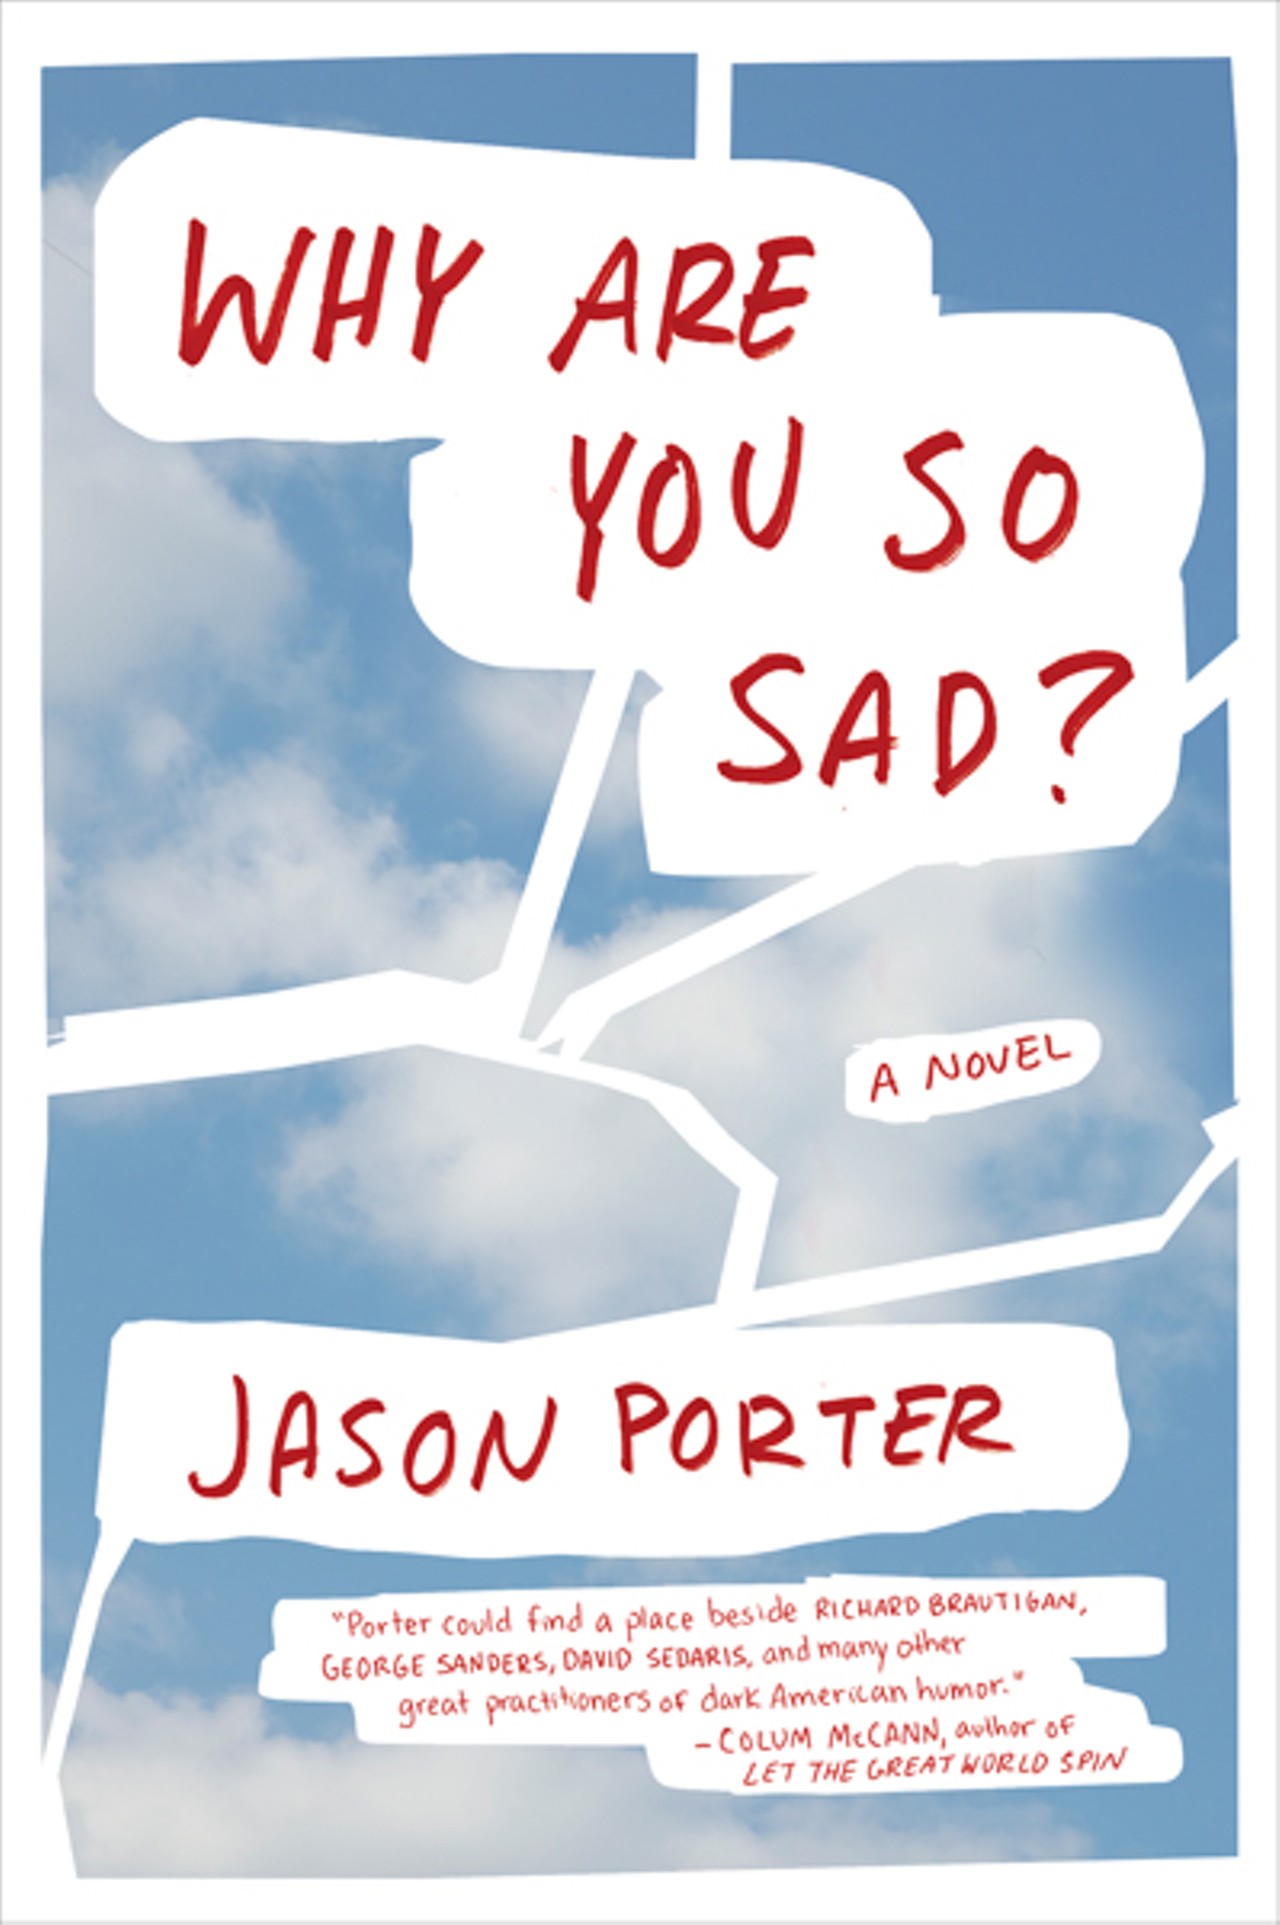 “Have we sunken into a species-wide bout of clinical depression?” This is the question posed in the debut novel Why Are You So Sad? by Jason Porter. The novel tells the story of one Raymond Champs, a furniture instruction manual illustrator who becomes obsessed with finding out if the world deserves to be saved. He determines that every man, woman and child on the planet is clinically depressed and sets out to collect the data to prove it — even if it means his wife and boss think he is losing his mind. Porter has been compared to authors like Gary Shteyngart, George Saunders, Douglas Coupland and Jennifer Egan, and has been described as “acutely perceptive and sharply funny.” The event also features a reading from fiction writer Sara Davis. The book launch happens on January 31 at 5 p.m.